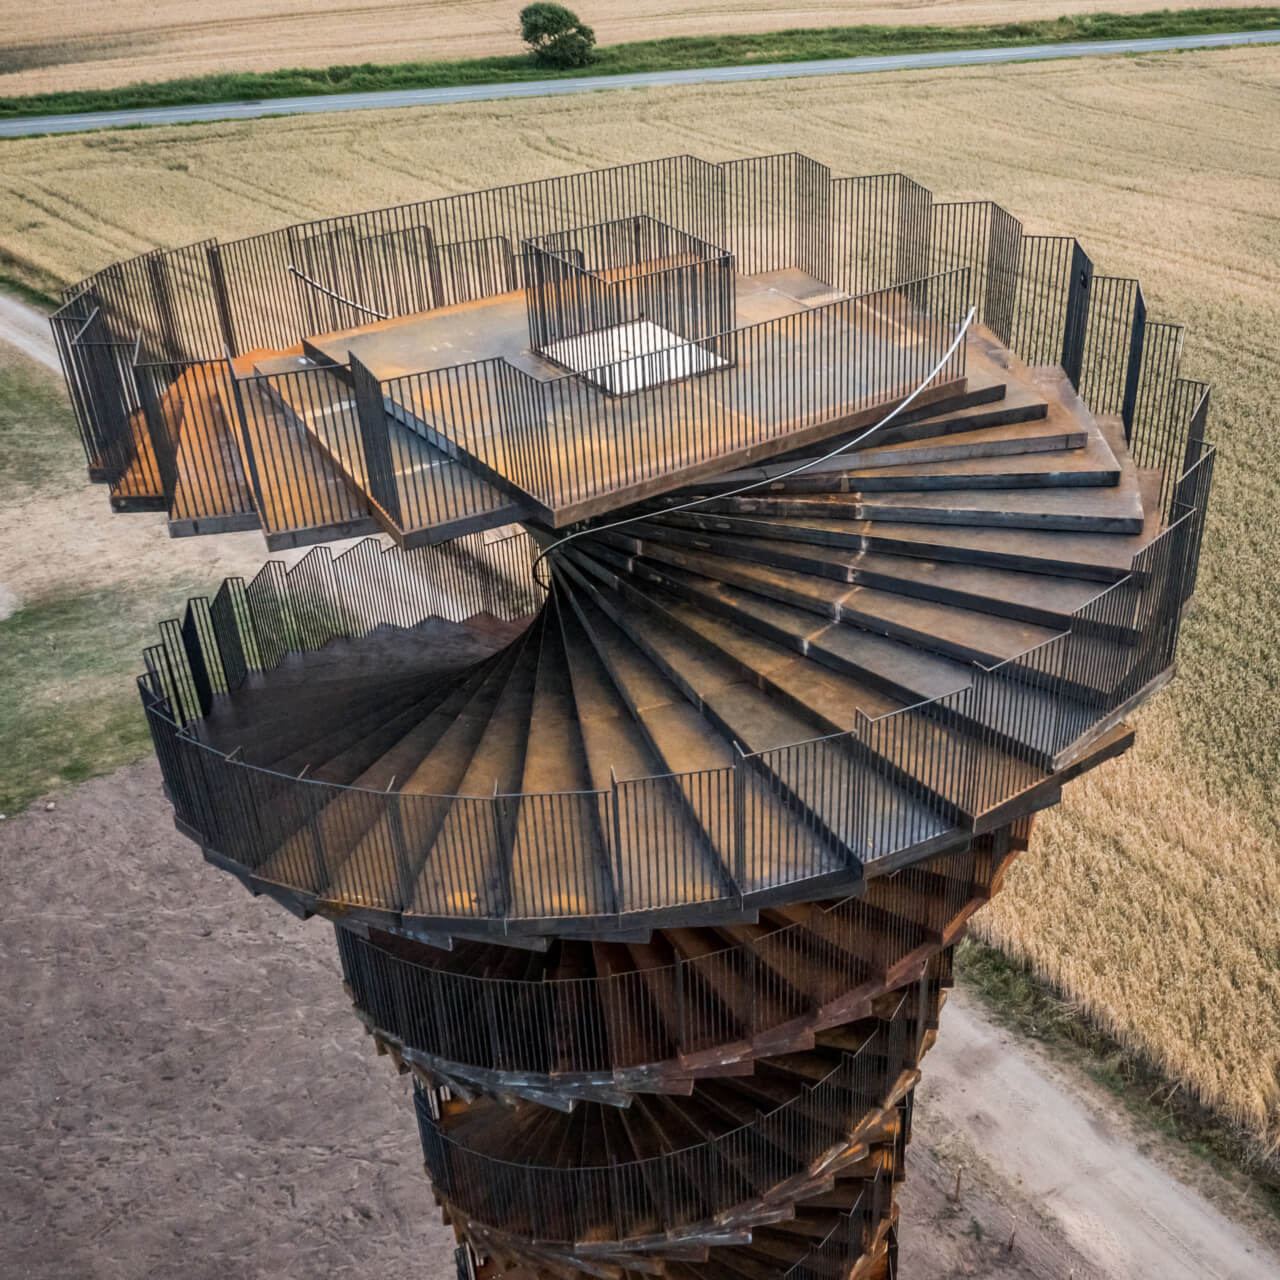 lookout perch atop a spiraling observation tower